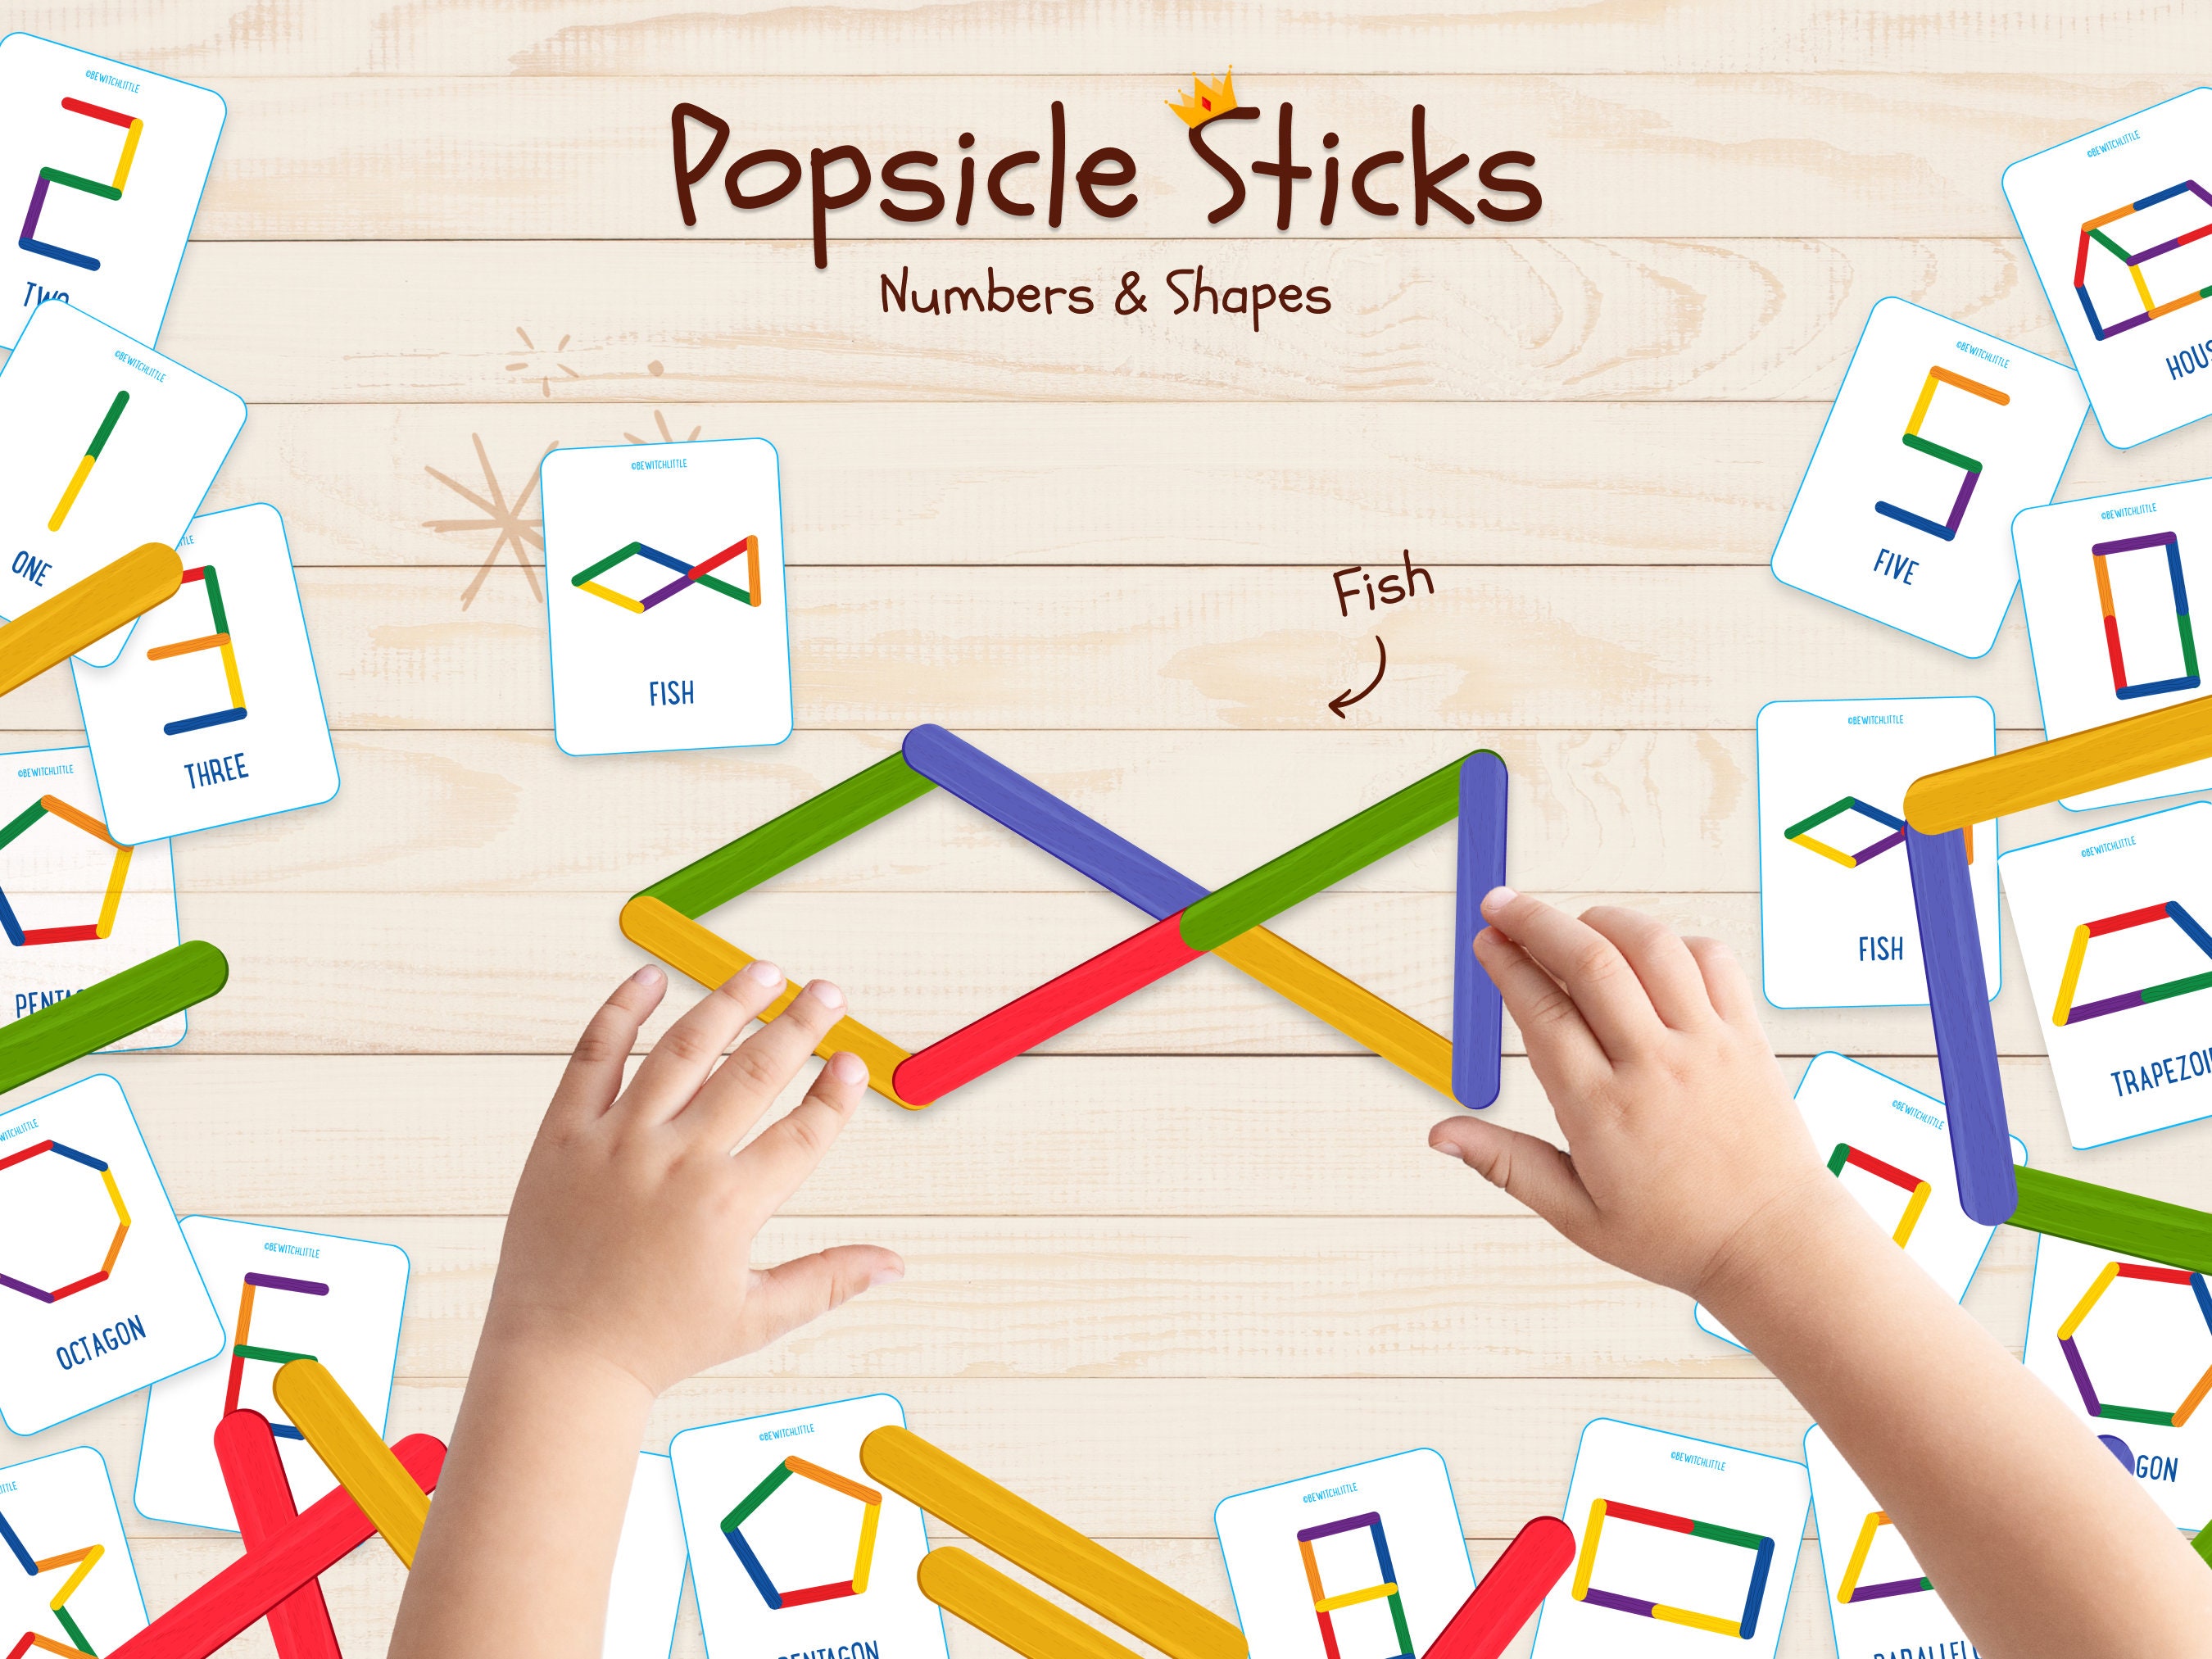 Build the Numbers 0-20 - Popsicle Stick Activity - Fun with Mama Shop